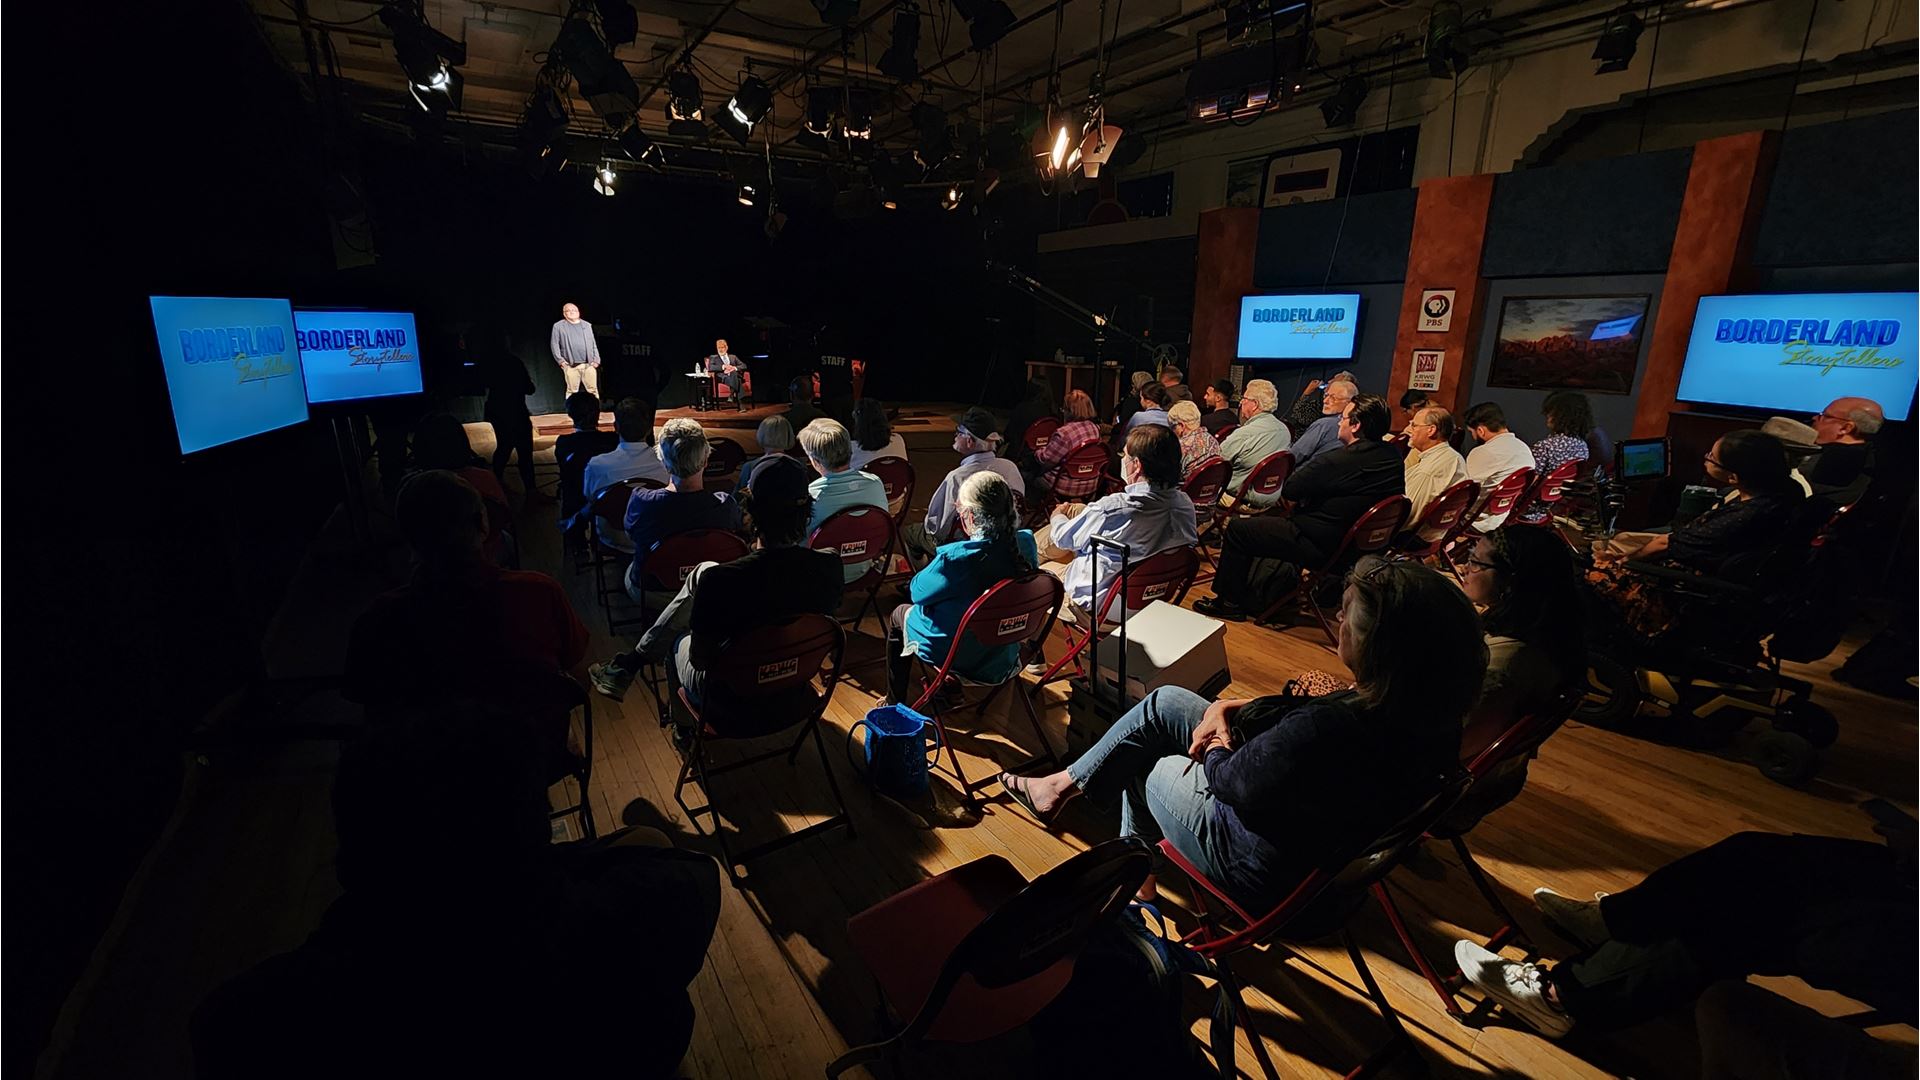 Borderland Storytellers call for community to join studio audience